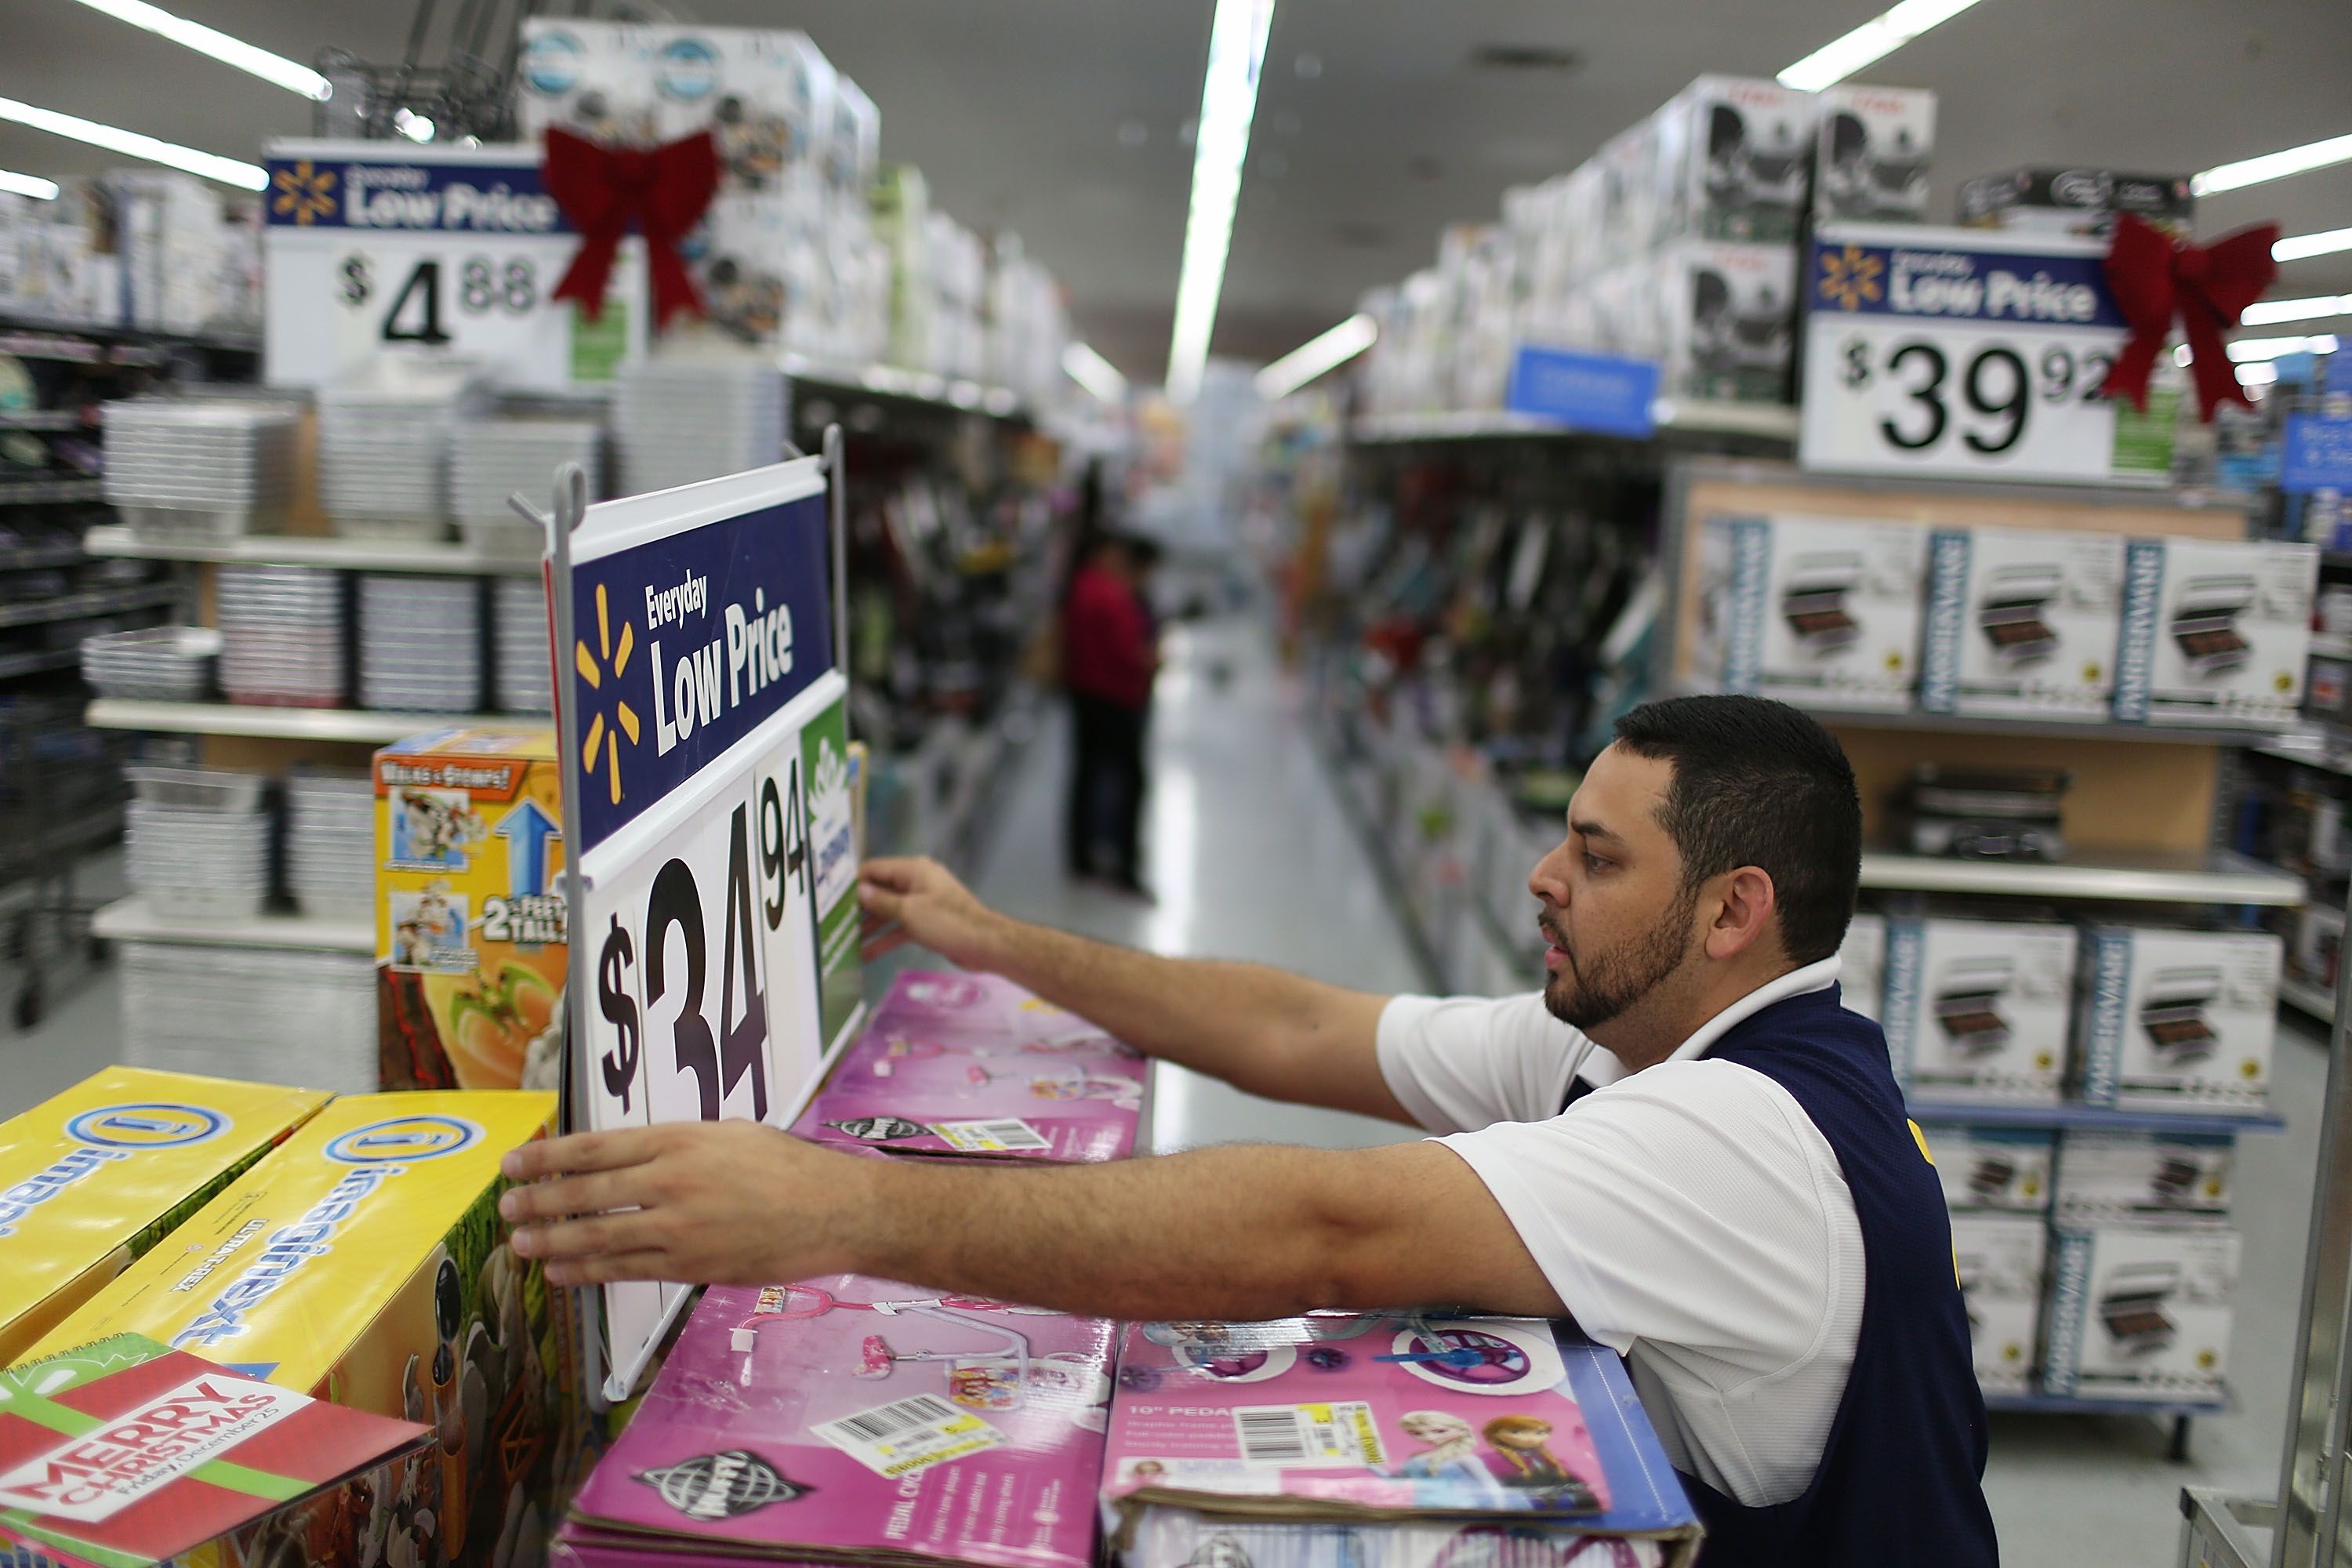 15 Crazy Facts About Walmart - Walmart History, Prices, and More